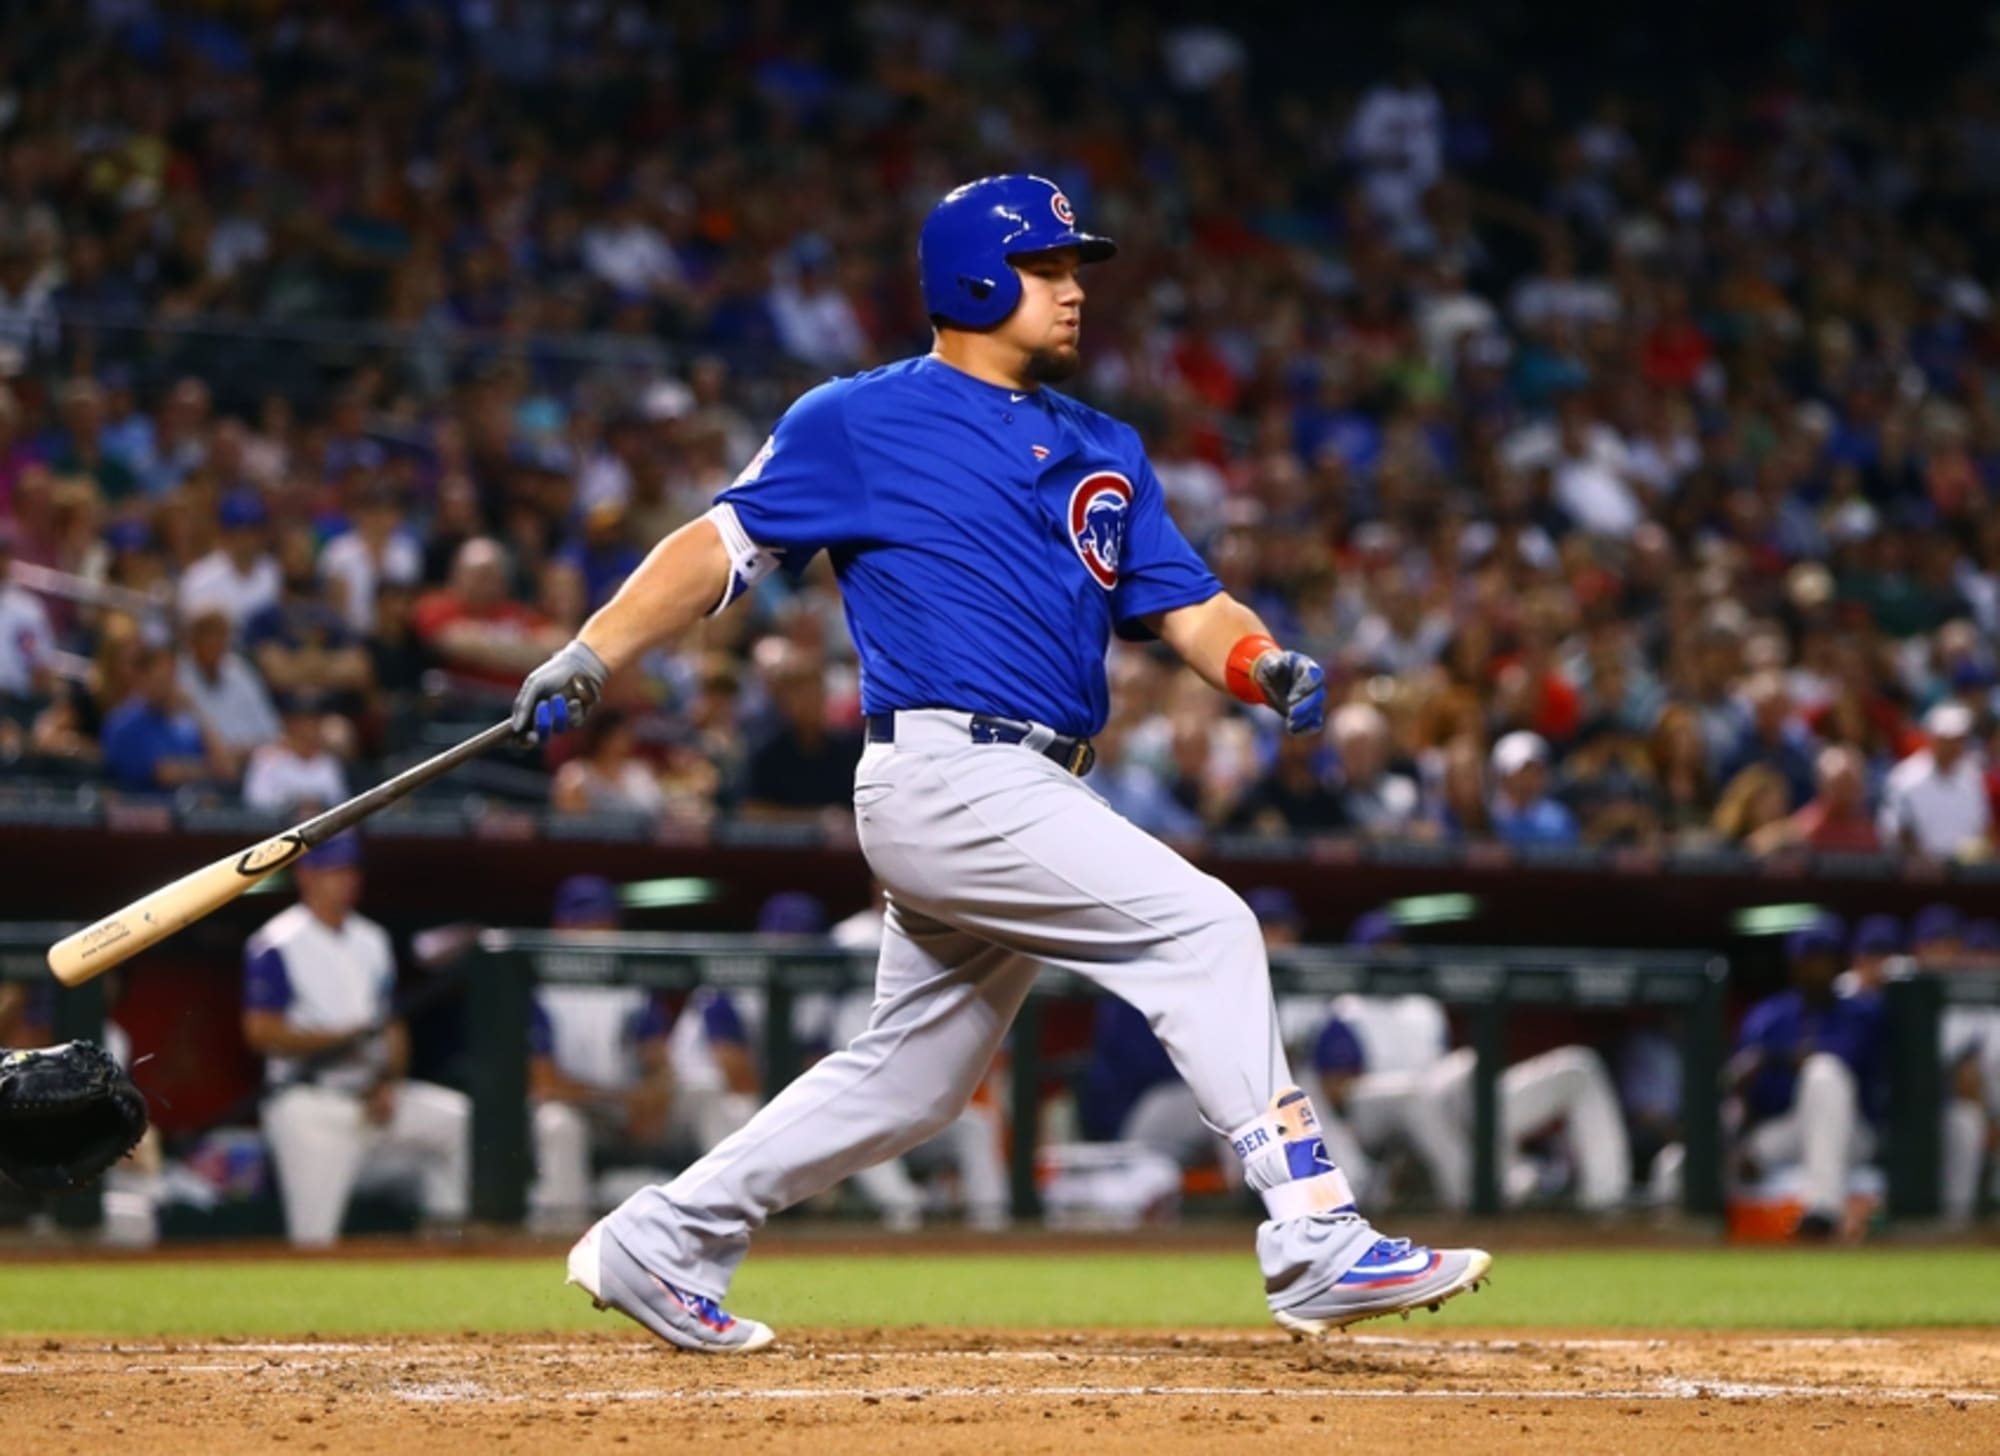 Chicago Cubs' Kyle Schwarber Could Be Changing Baseball